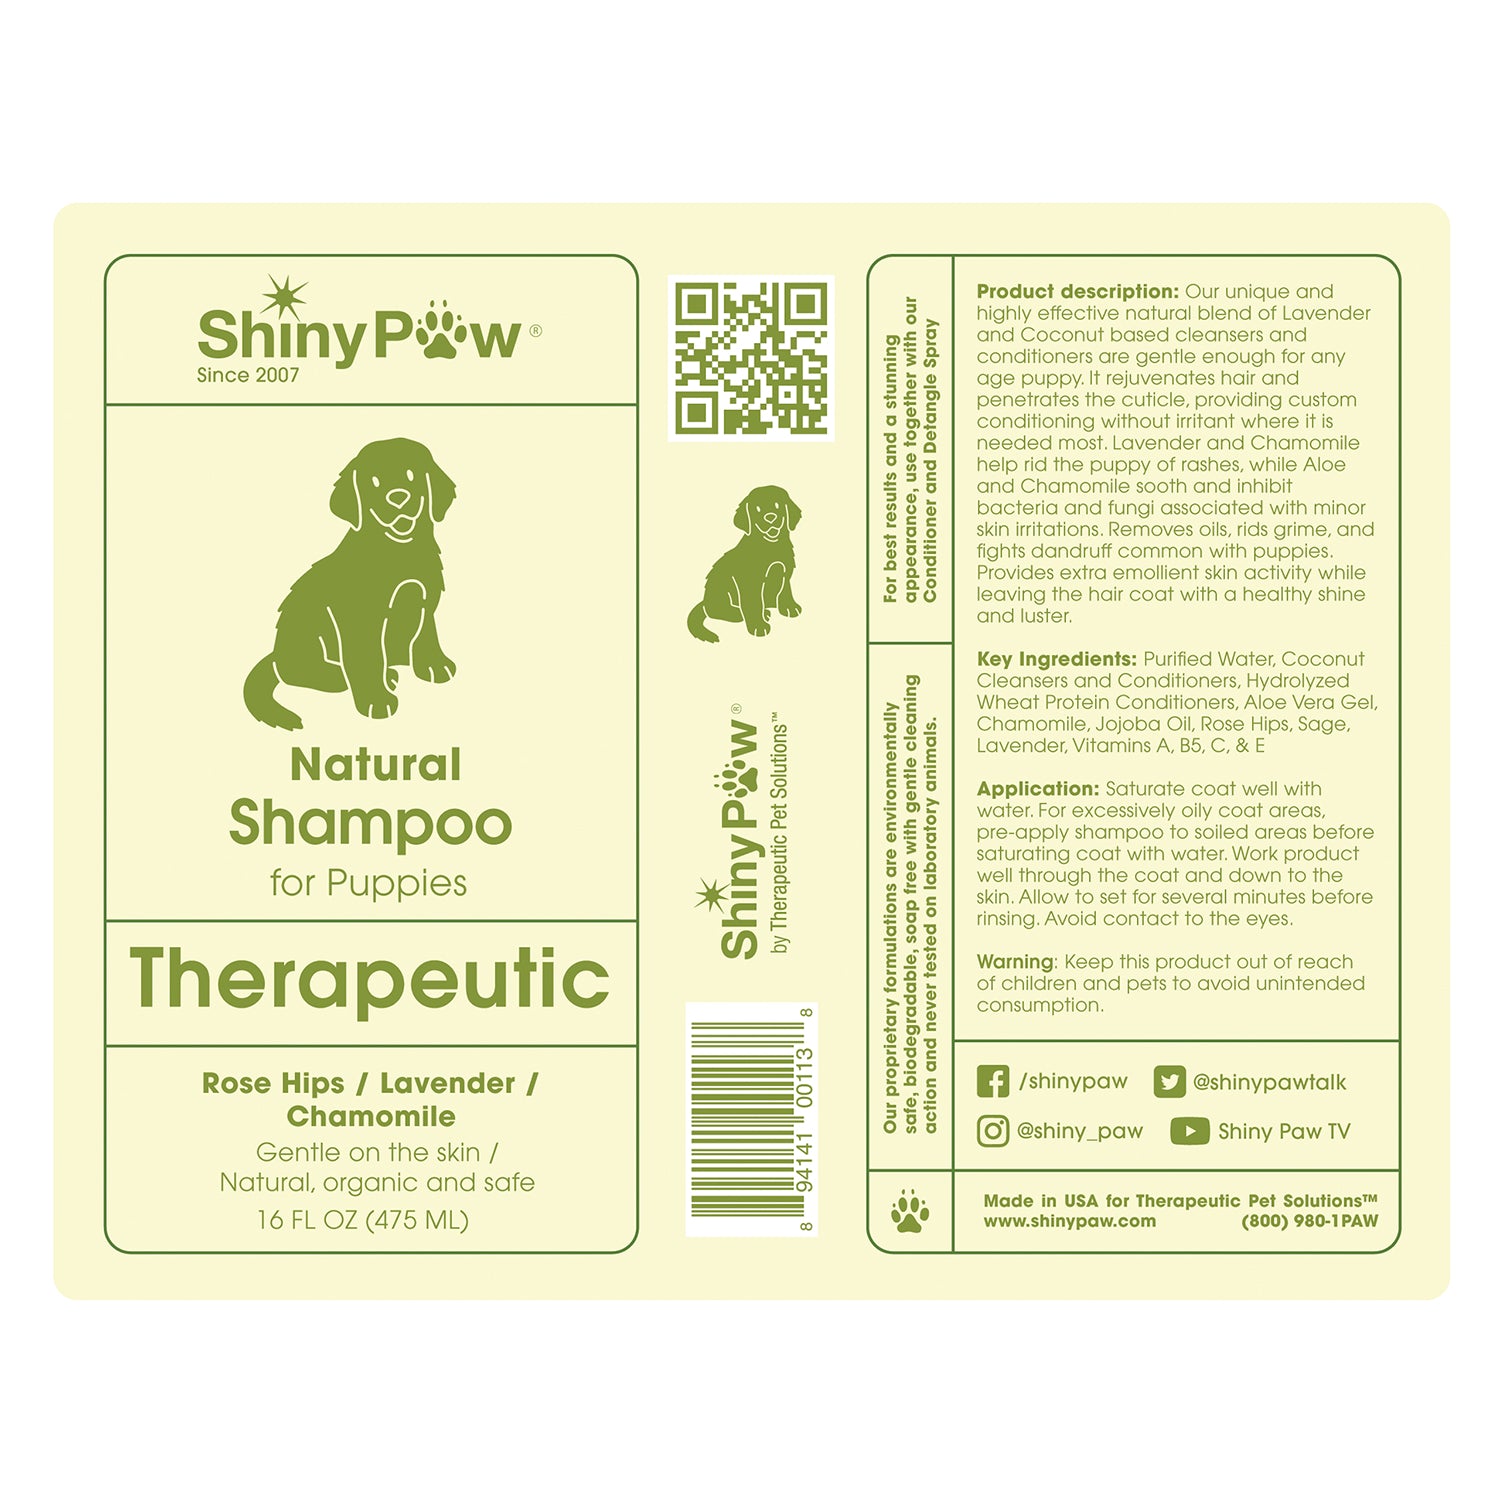 Shiny Paw Natural Therapeutic Puppy Shampoo Rose Hips Lavender Chamomile